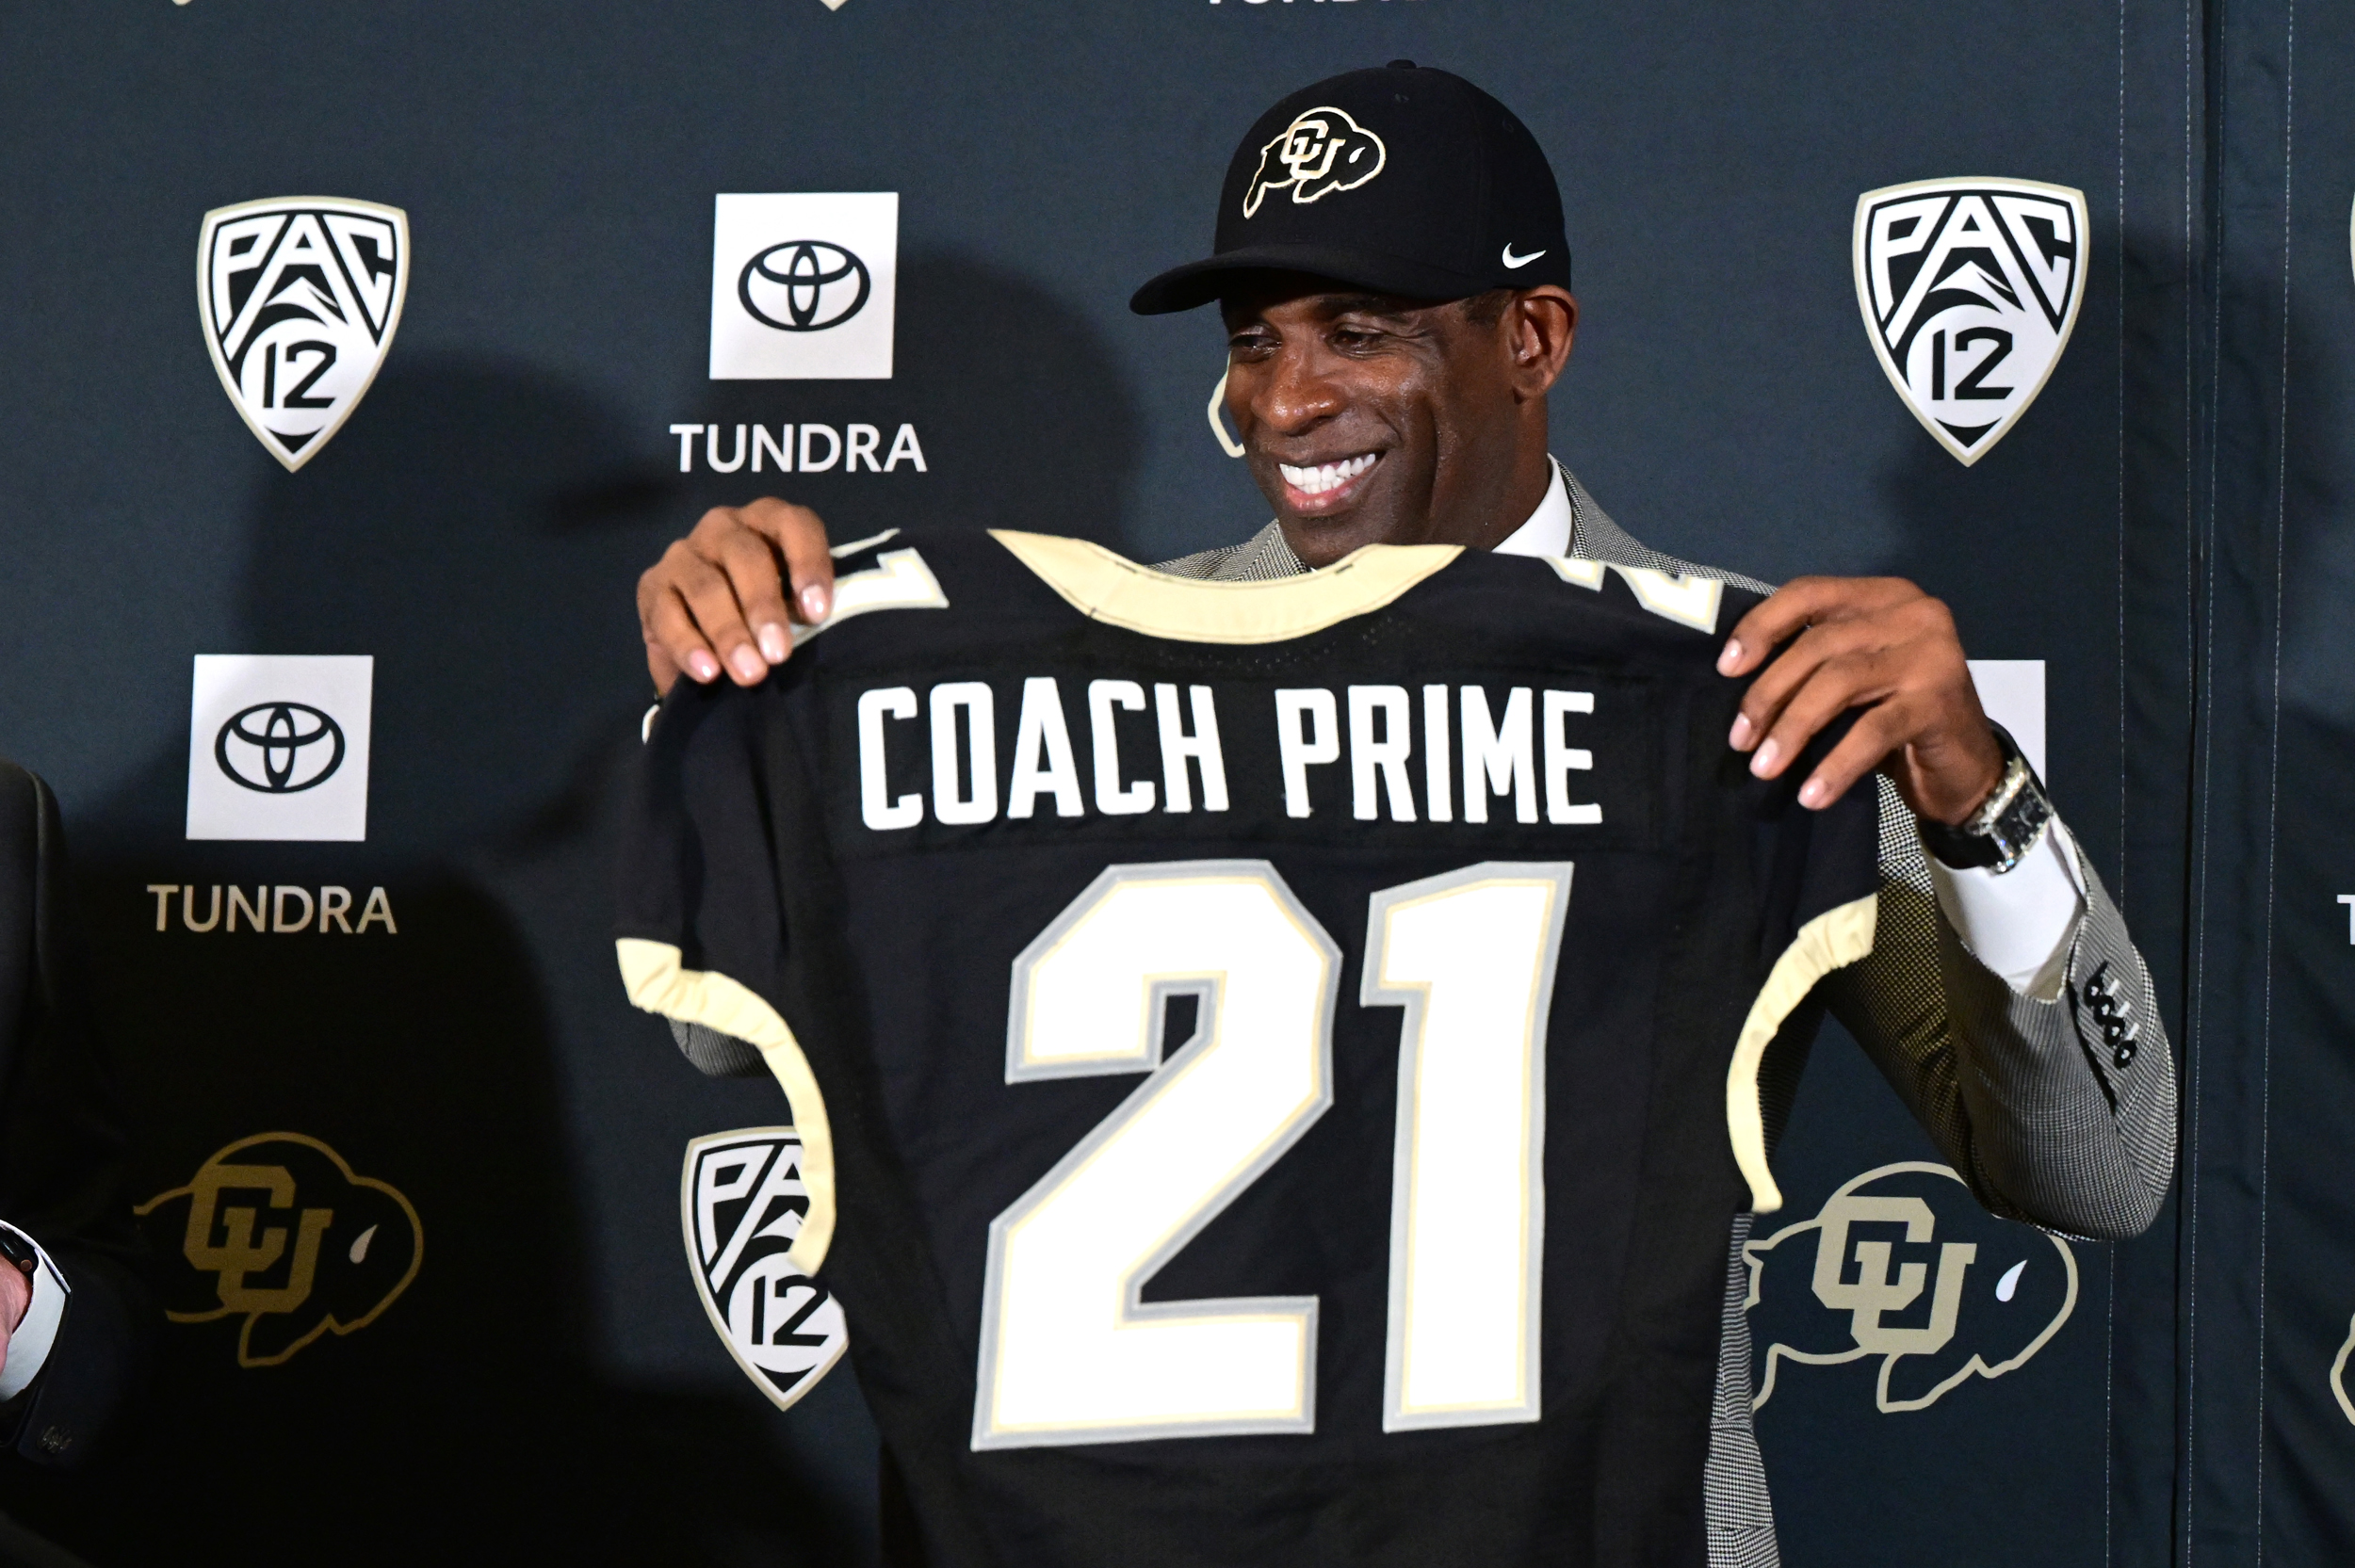 Coach Prime Embraces Change As He Moves Into New Coaching Gig At Colorado